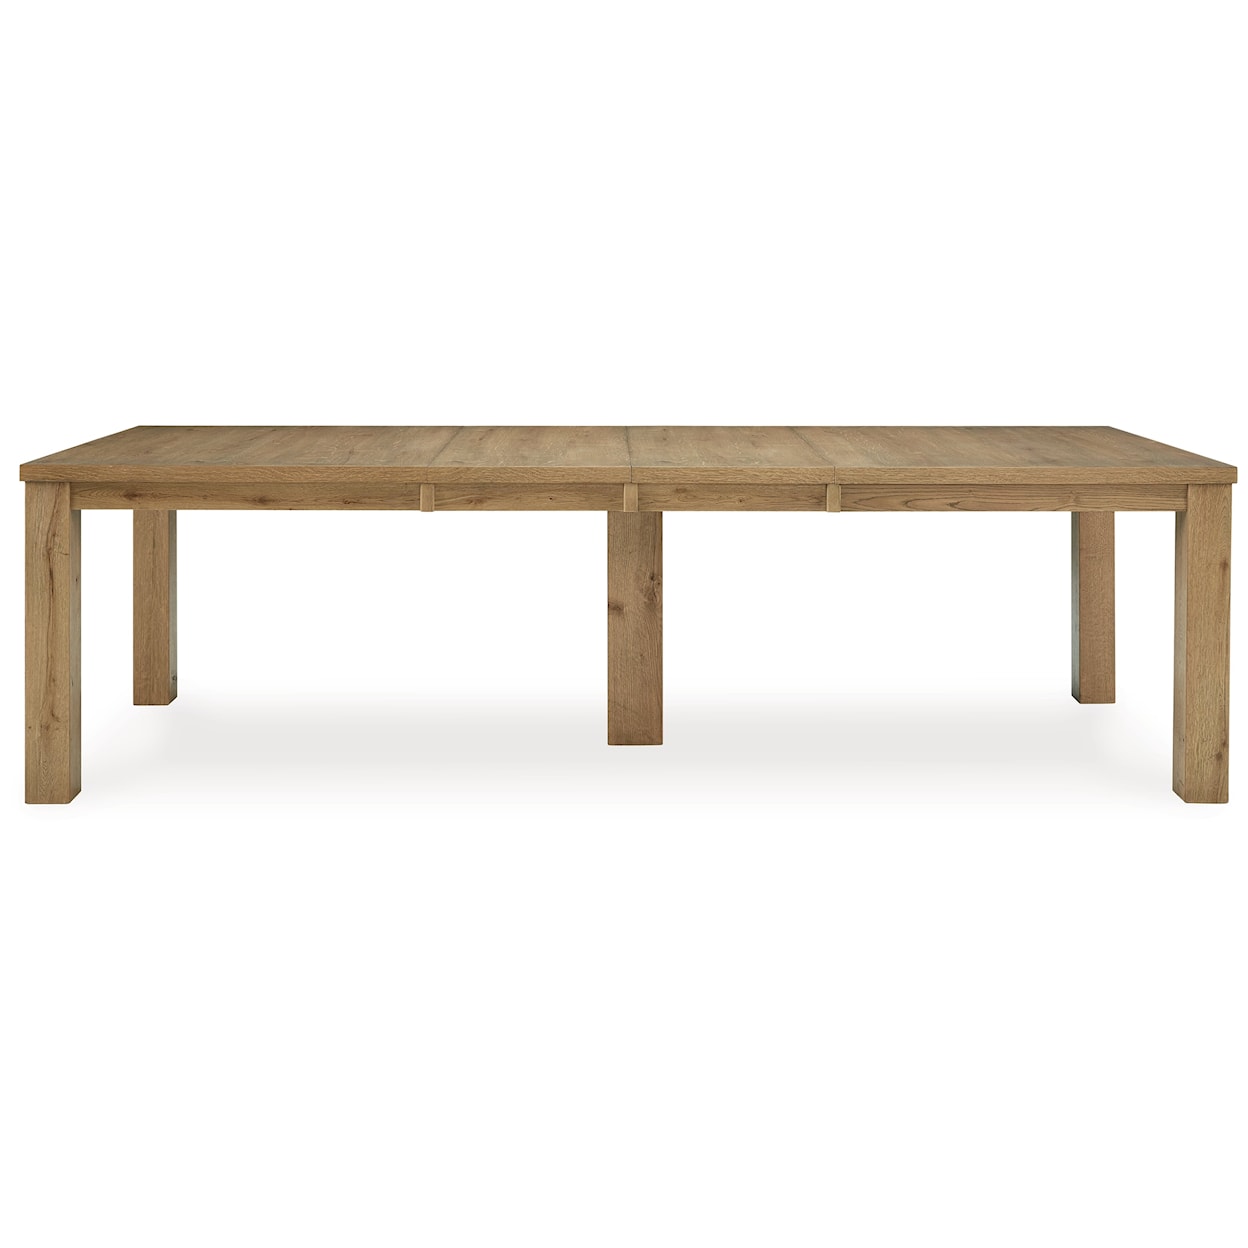 Benchcraft Galliden Dining Extension Table